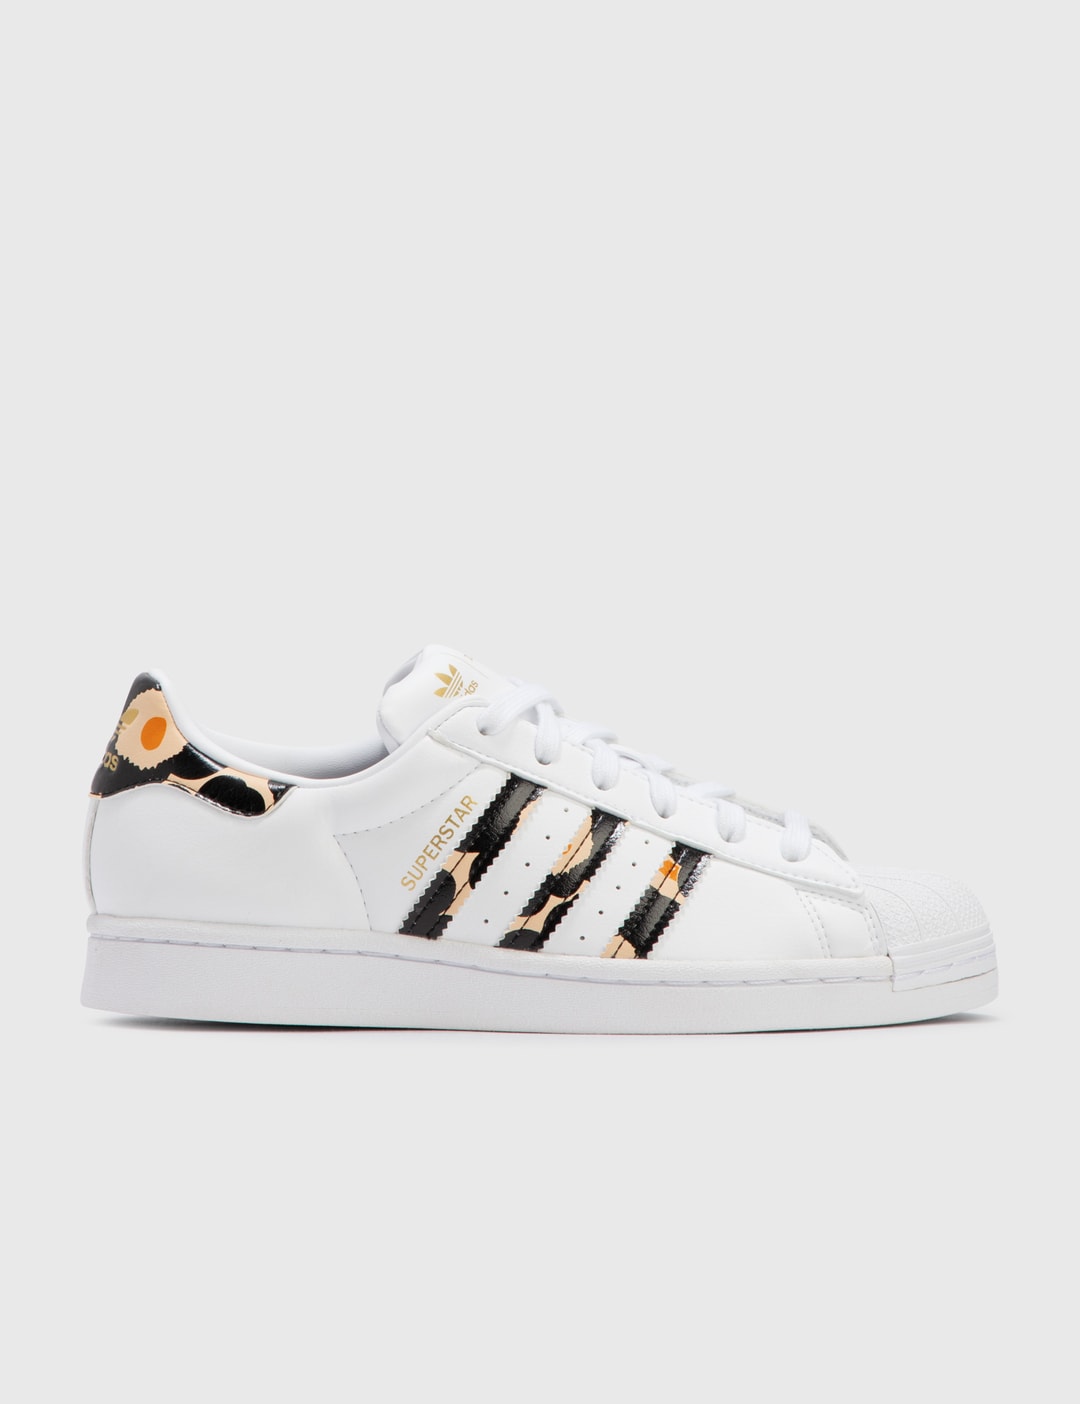 Banzai delikatesse En del Adidas Originals - Superstar W | HBX - Globally Curated Fashion and  Lifestyle by Hypebeast